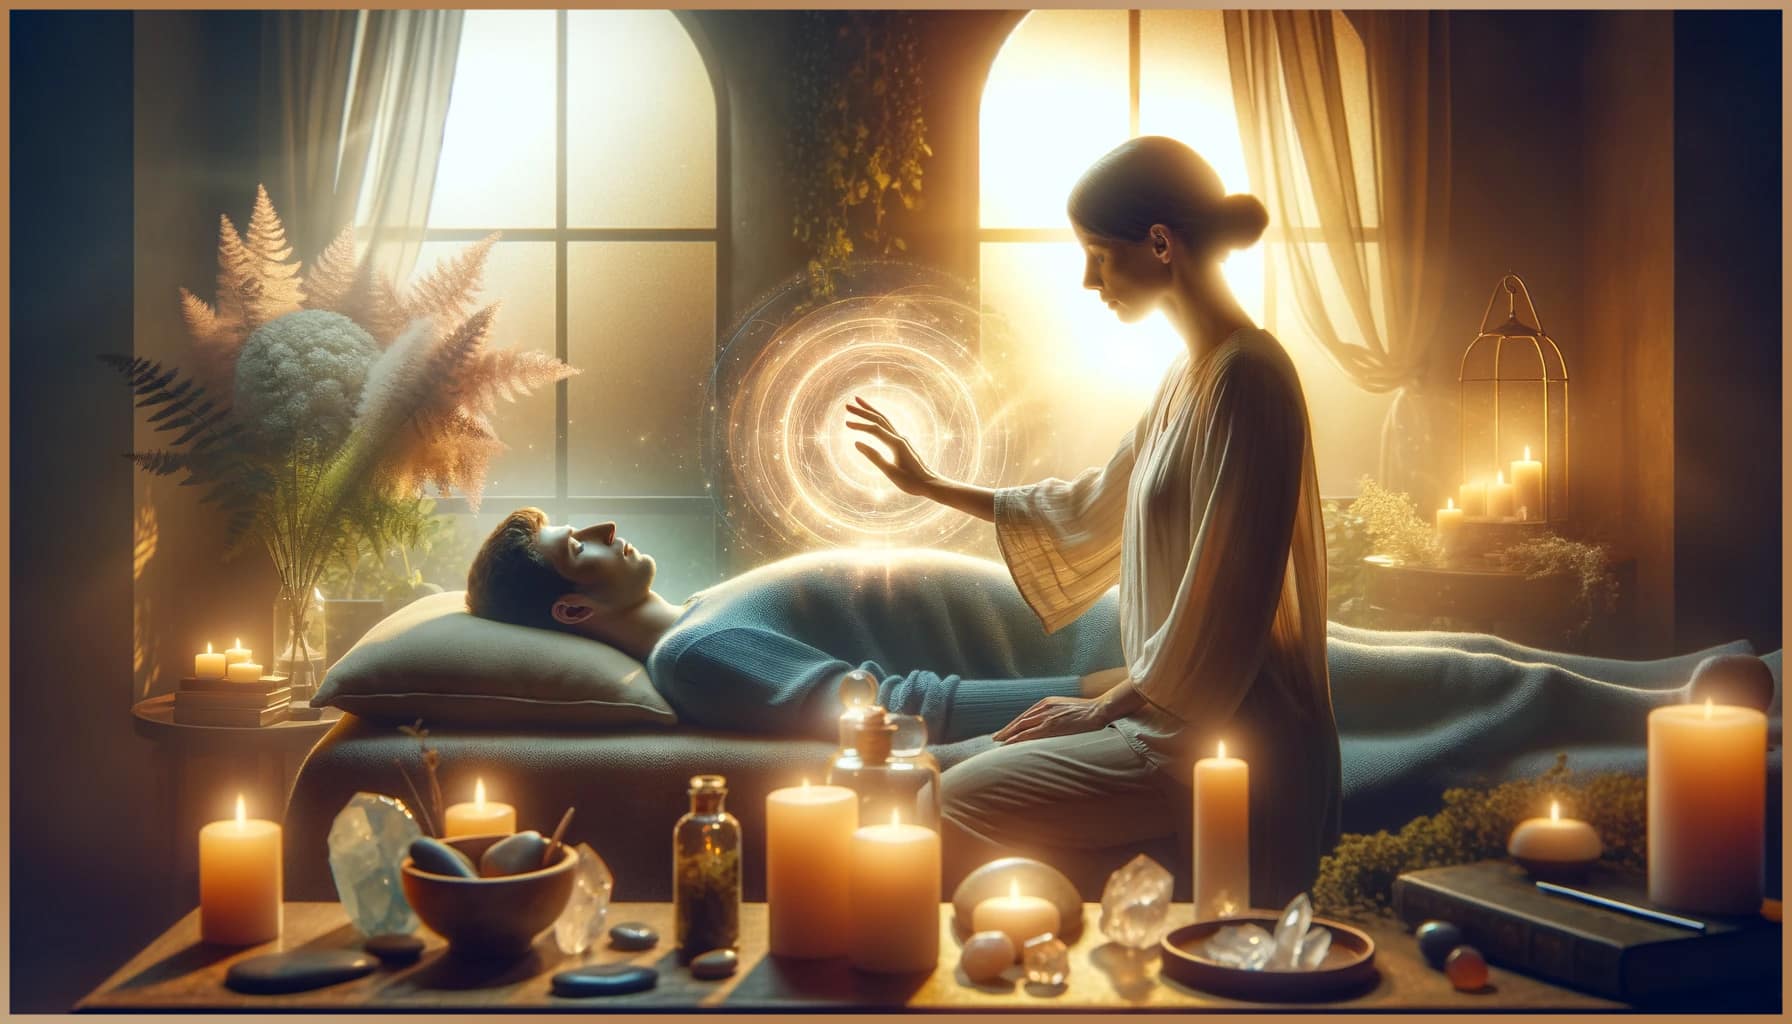 Energy healing session with a healer channeling energy over a relaxed individual amidst a serene setting with candles and crystals.